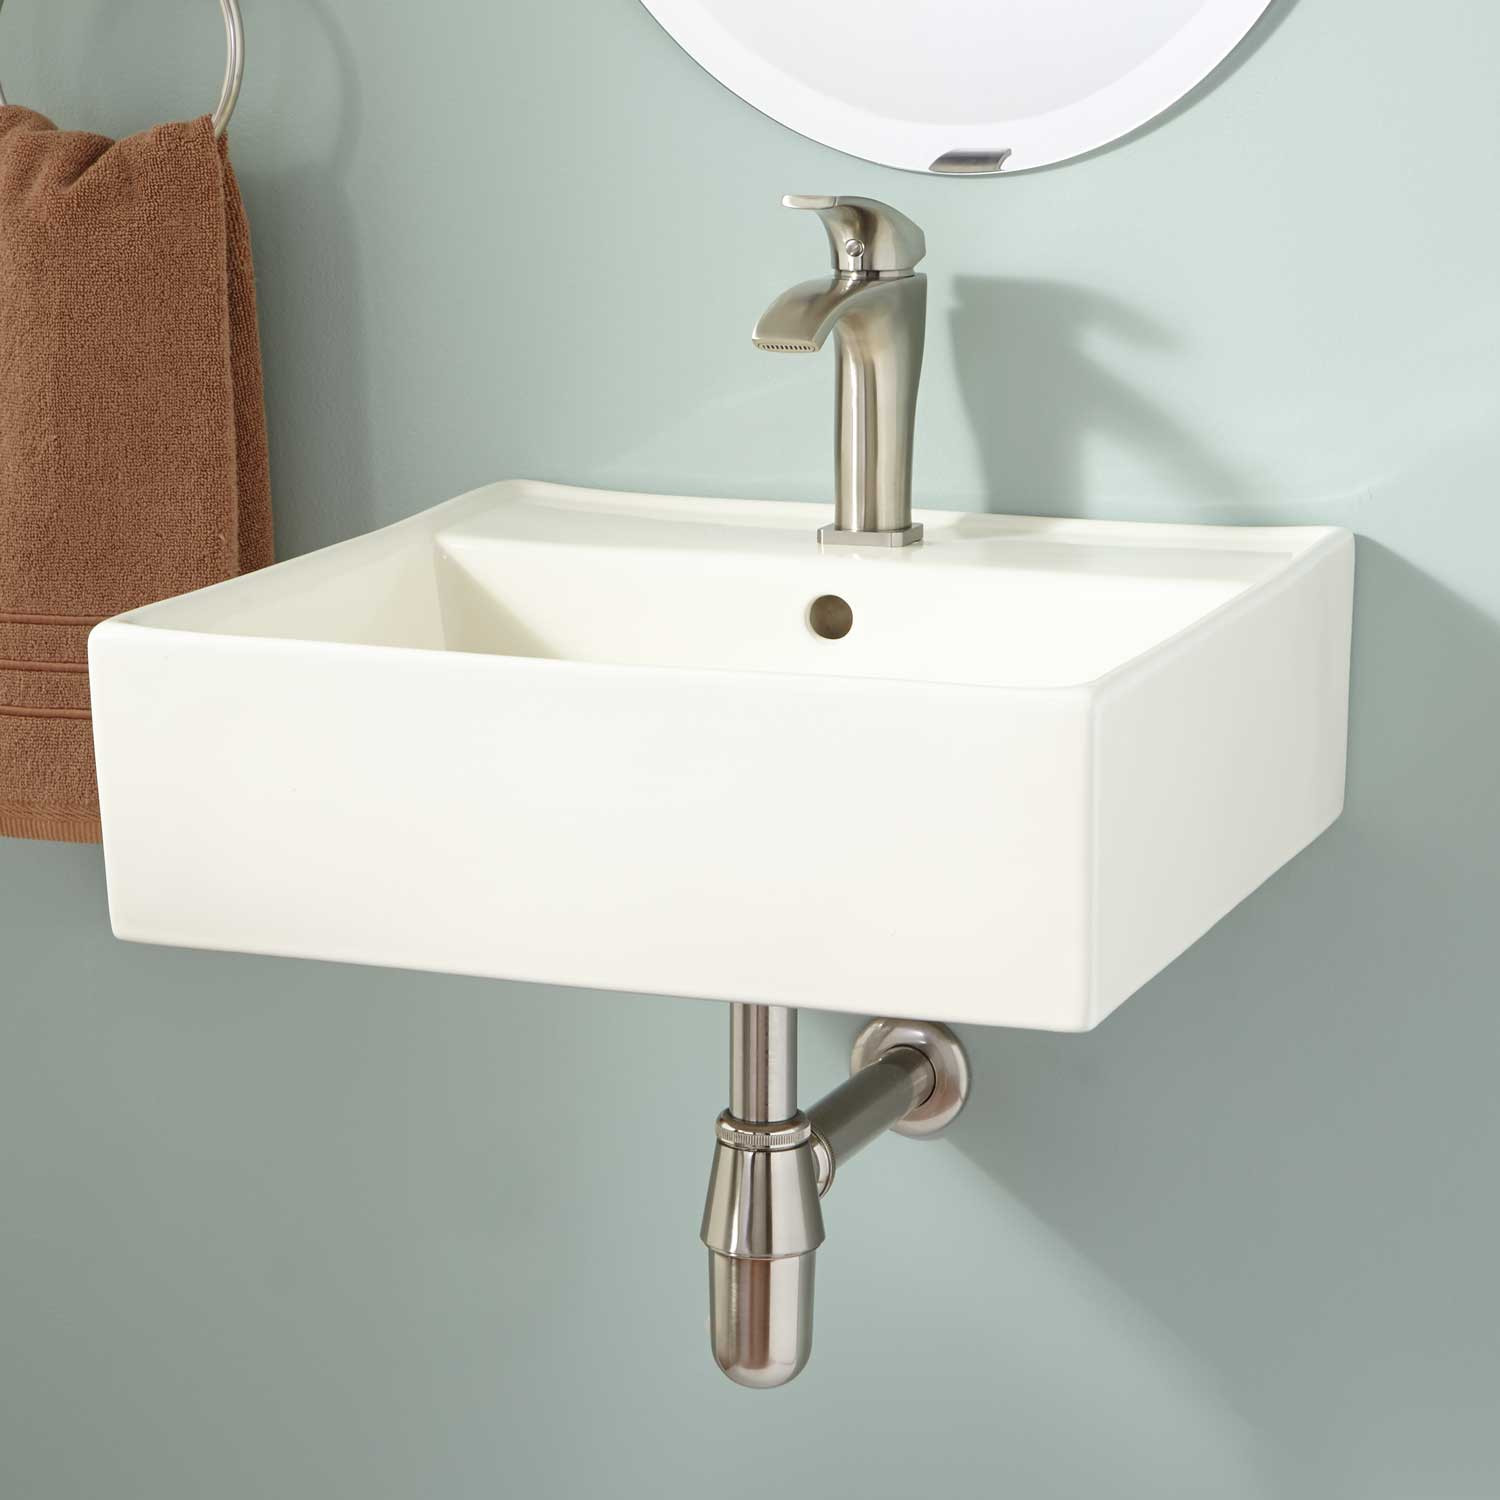 Wall Mounted Bathroom Sink
 Signature Hardware Audrie Porcelain Wall Mount Bathroom